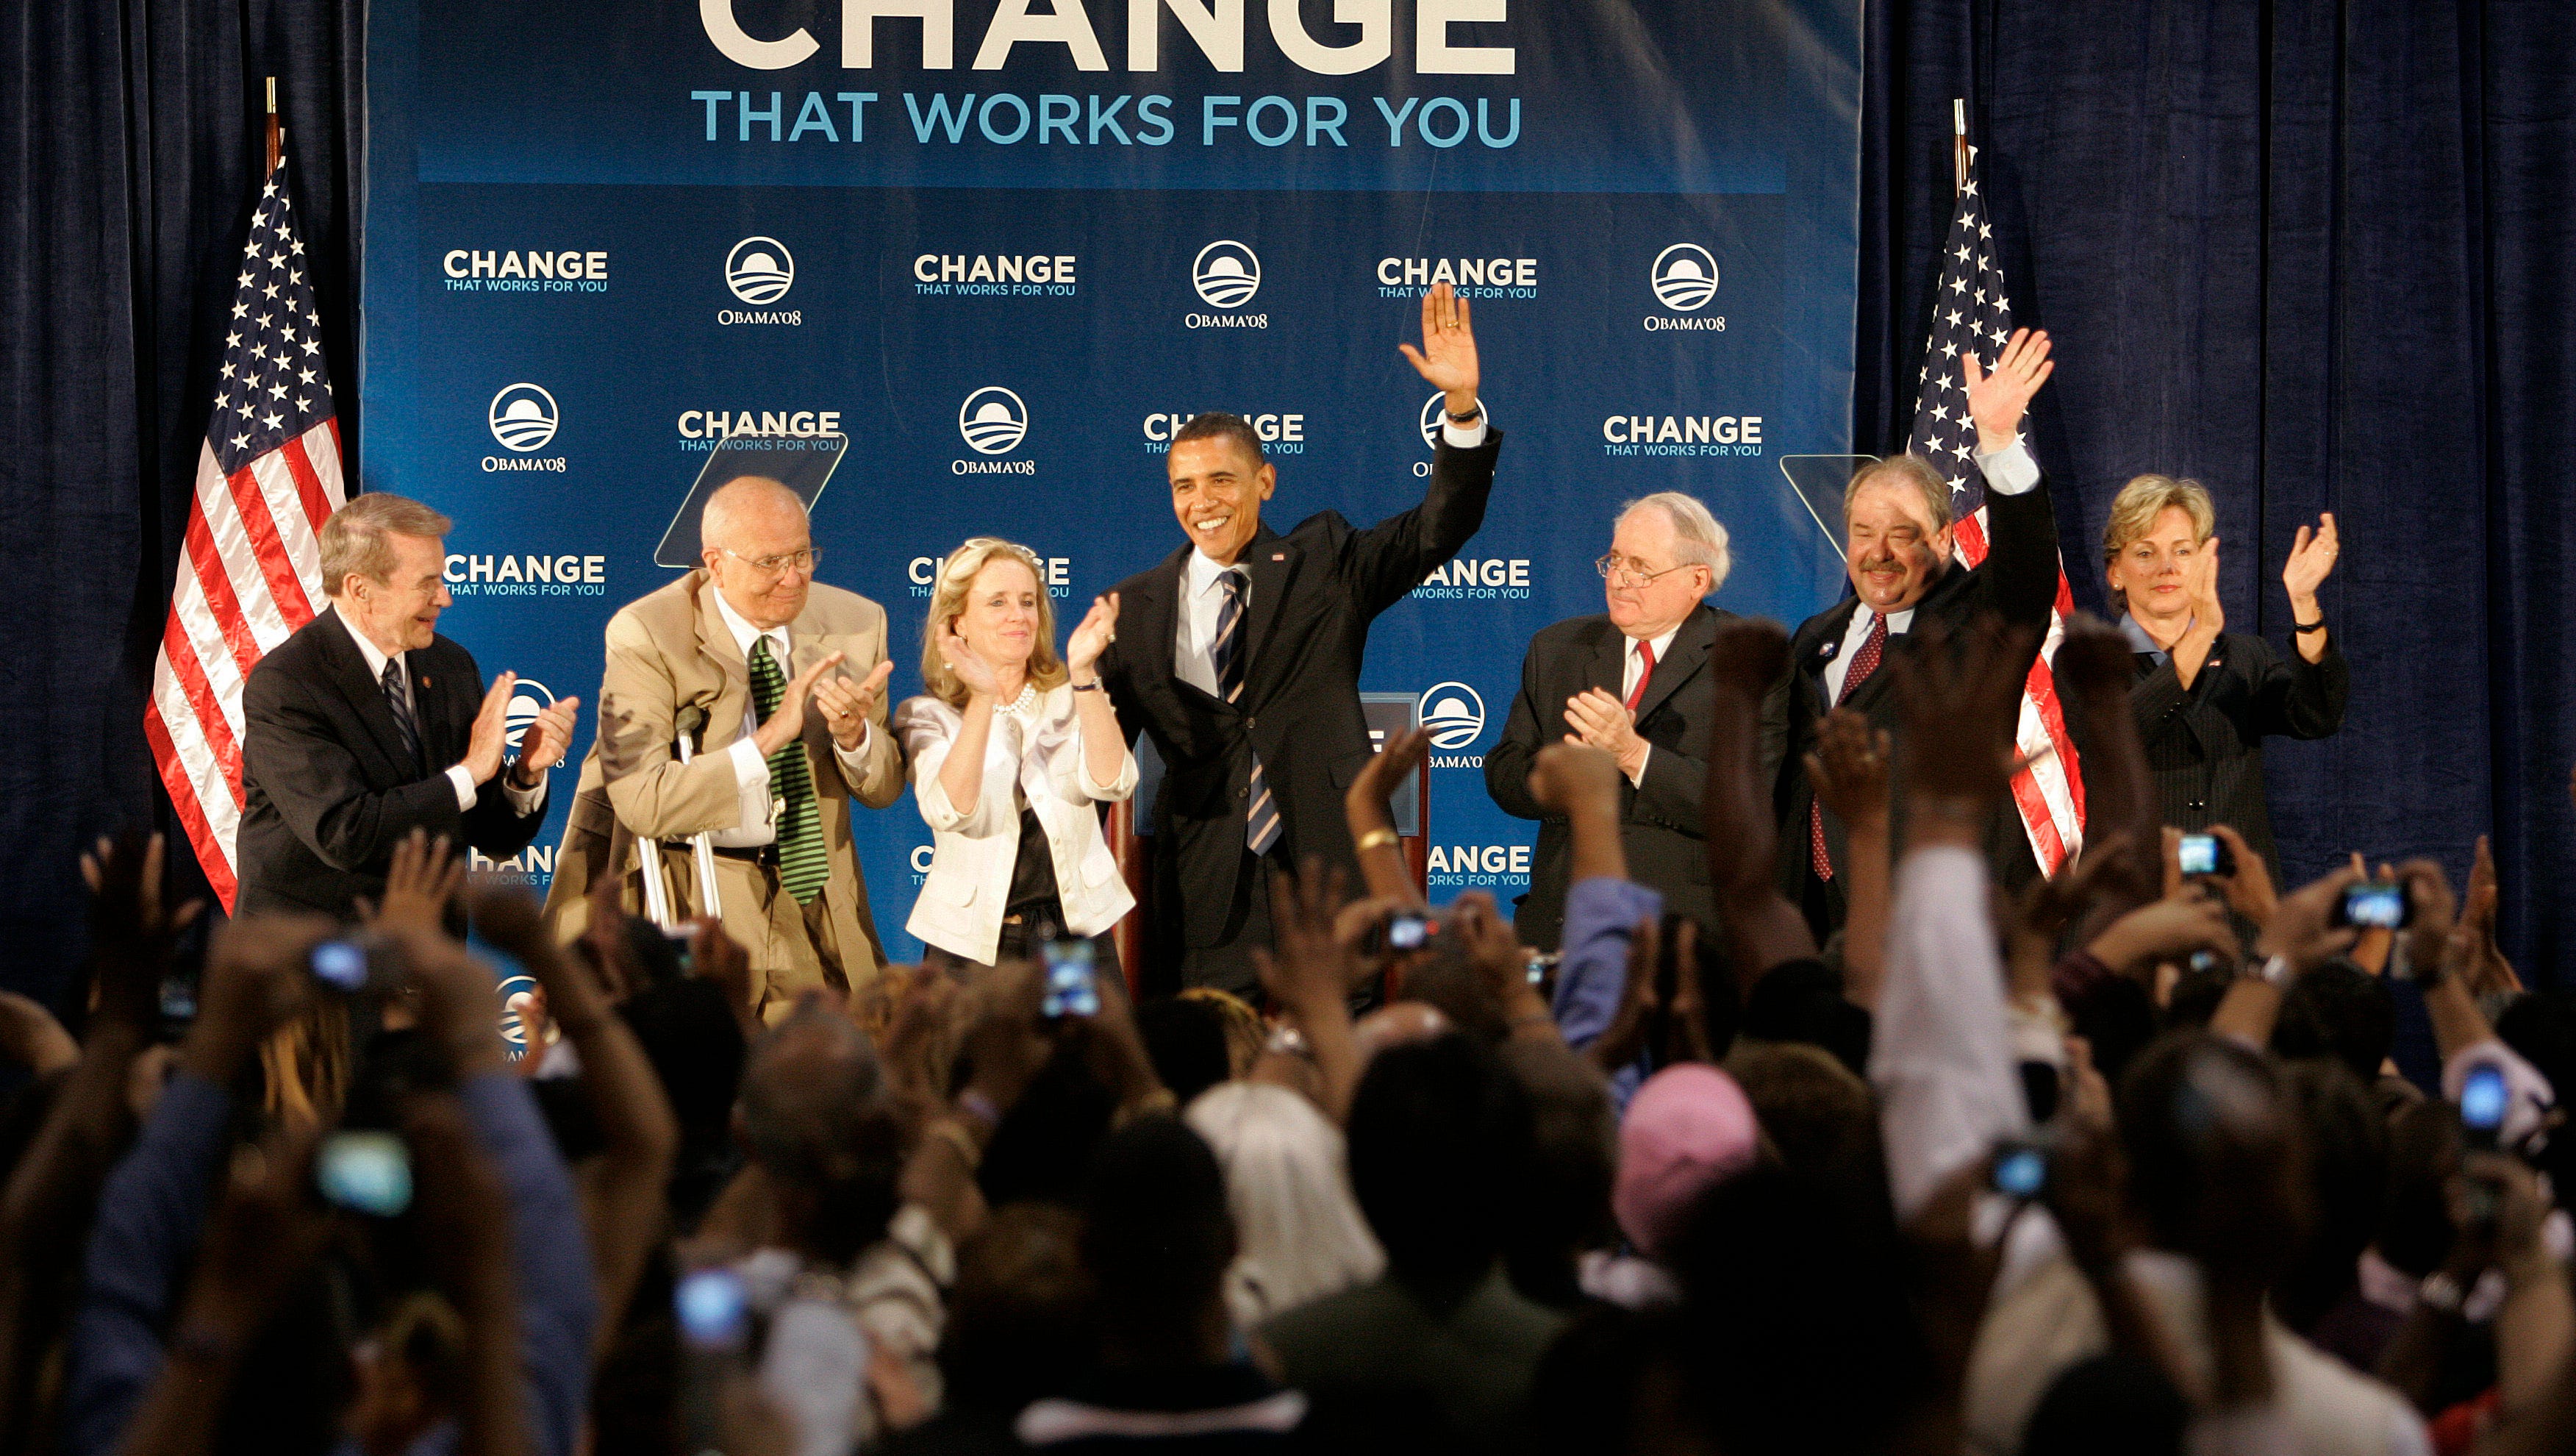 Democratic presidential candidate Barack Obama speaks to a crowd at Kettering University in Flint on June 16, 2008, with, from left, Rep. Dale Kildee, Rep. John Dingell and his wife Debbie Dingell, Sen. Carl Levin, Michigan Lt. Gov John Cherry and Gov Jennifer Granholm.